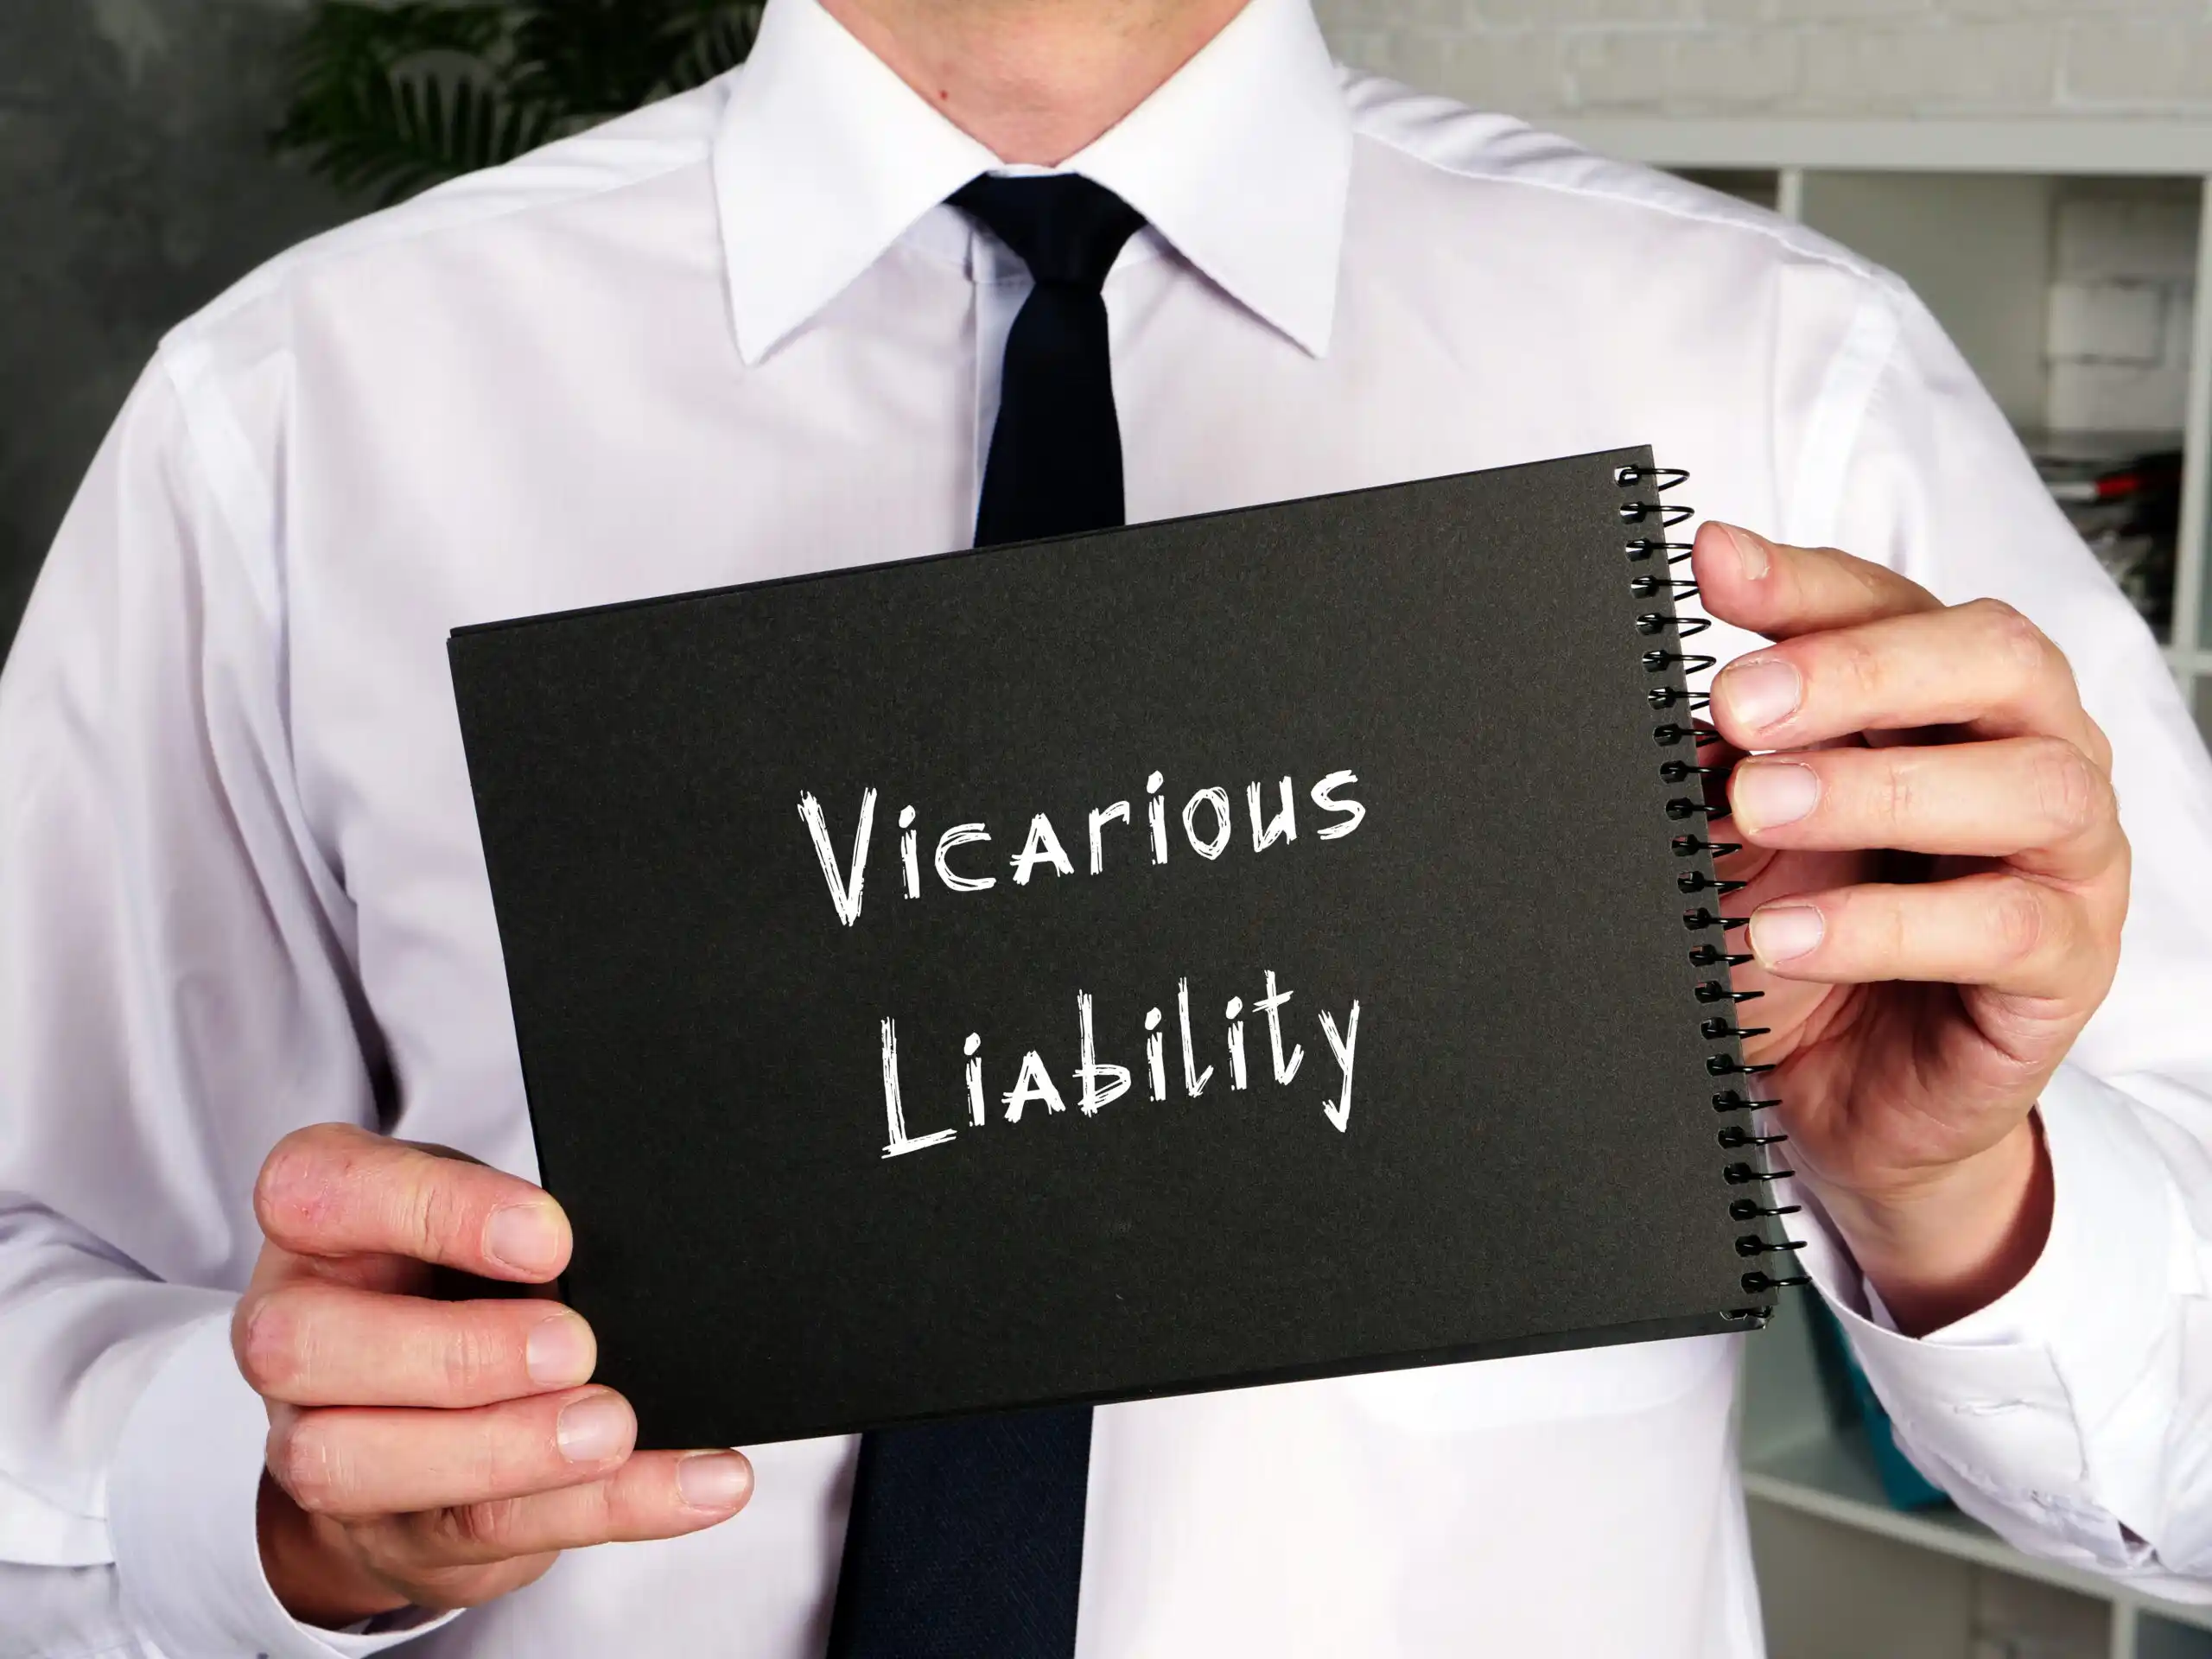 Vicarious Liability: What Is It and How Does it Work?